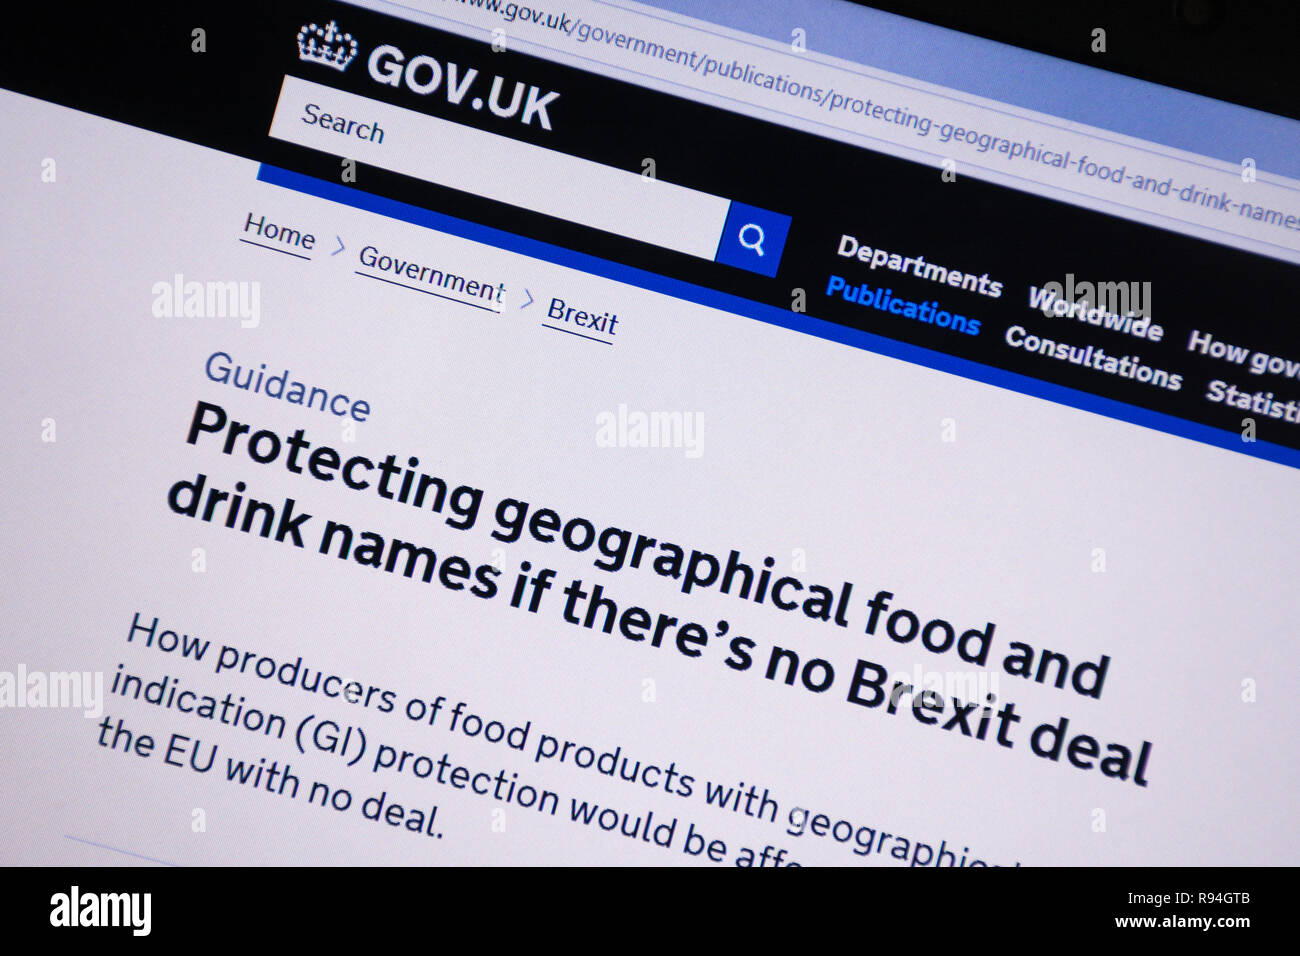 Computer screenshot of the gov.uk website showing advice on protecting geographical food and drink names if there is no Brexit deal Stock Photo